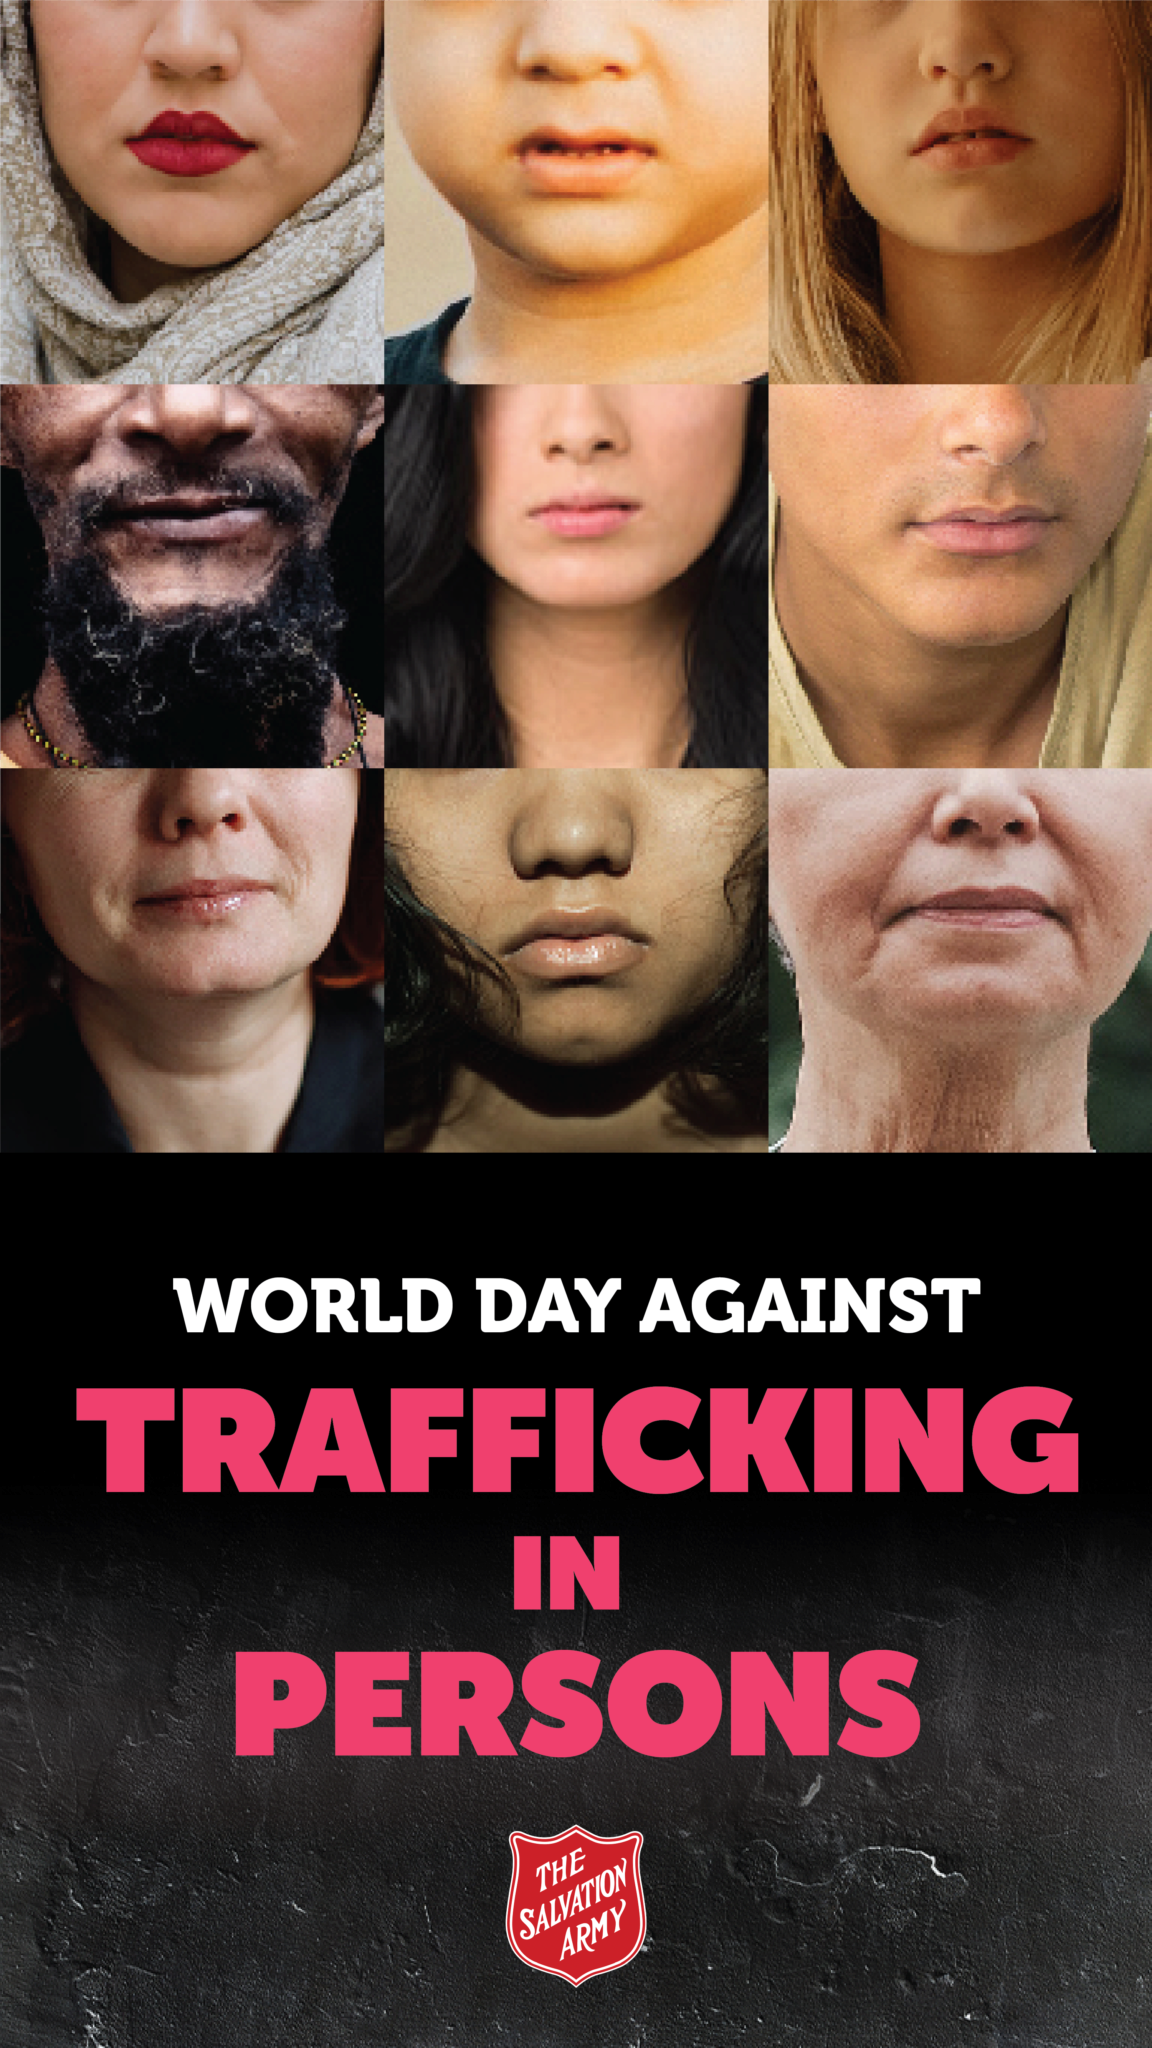 World day against trafficking in persons Image for Instagram story